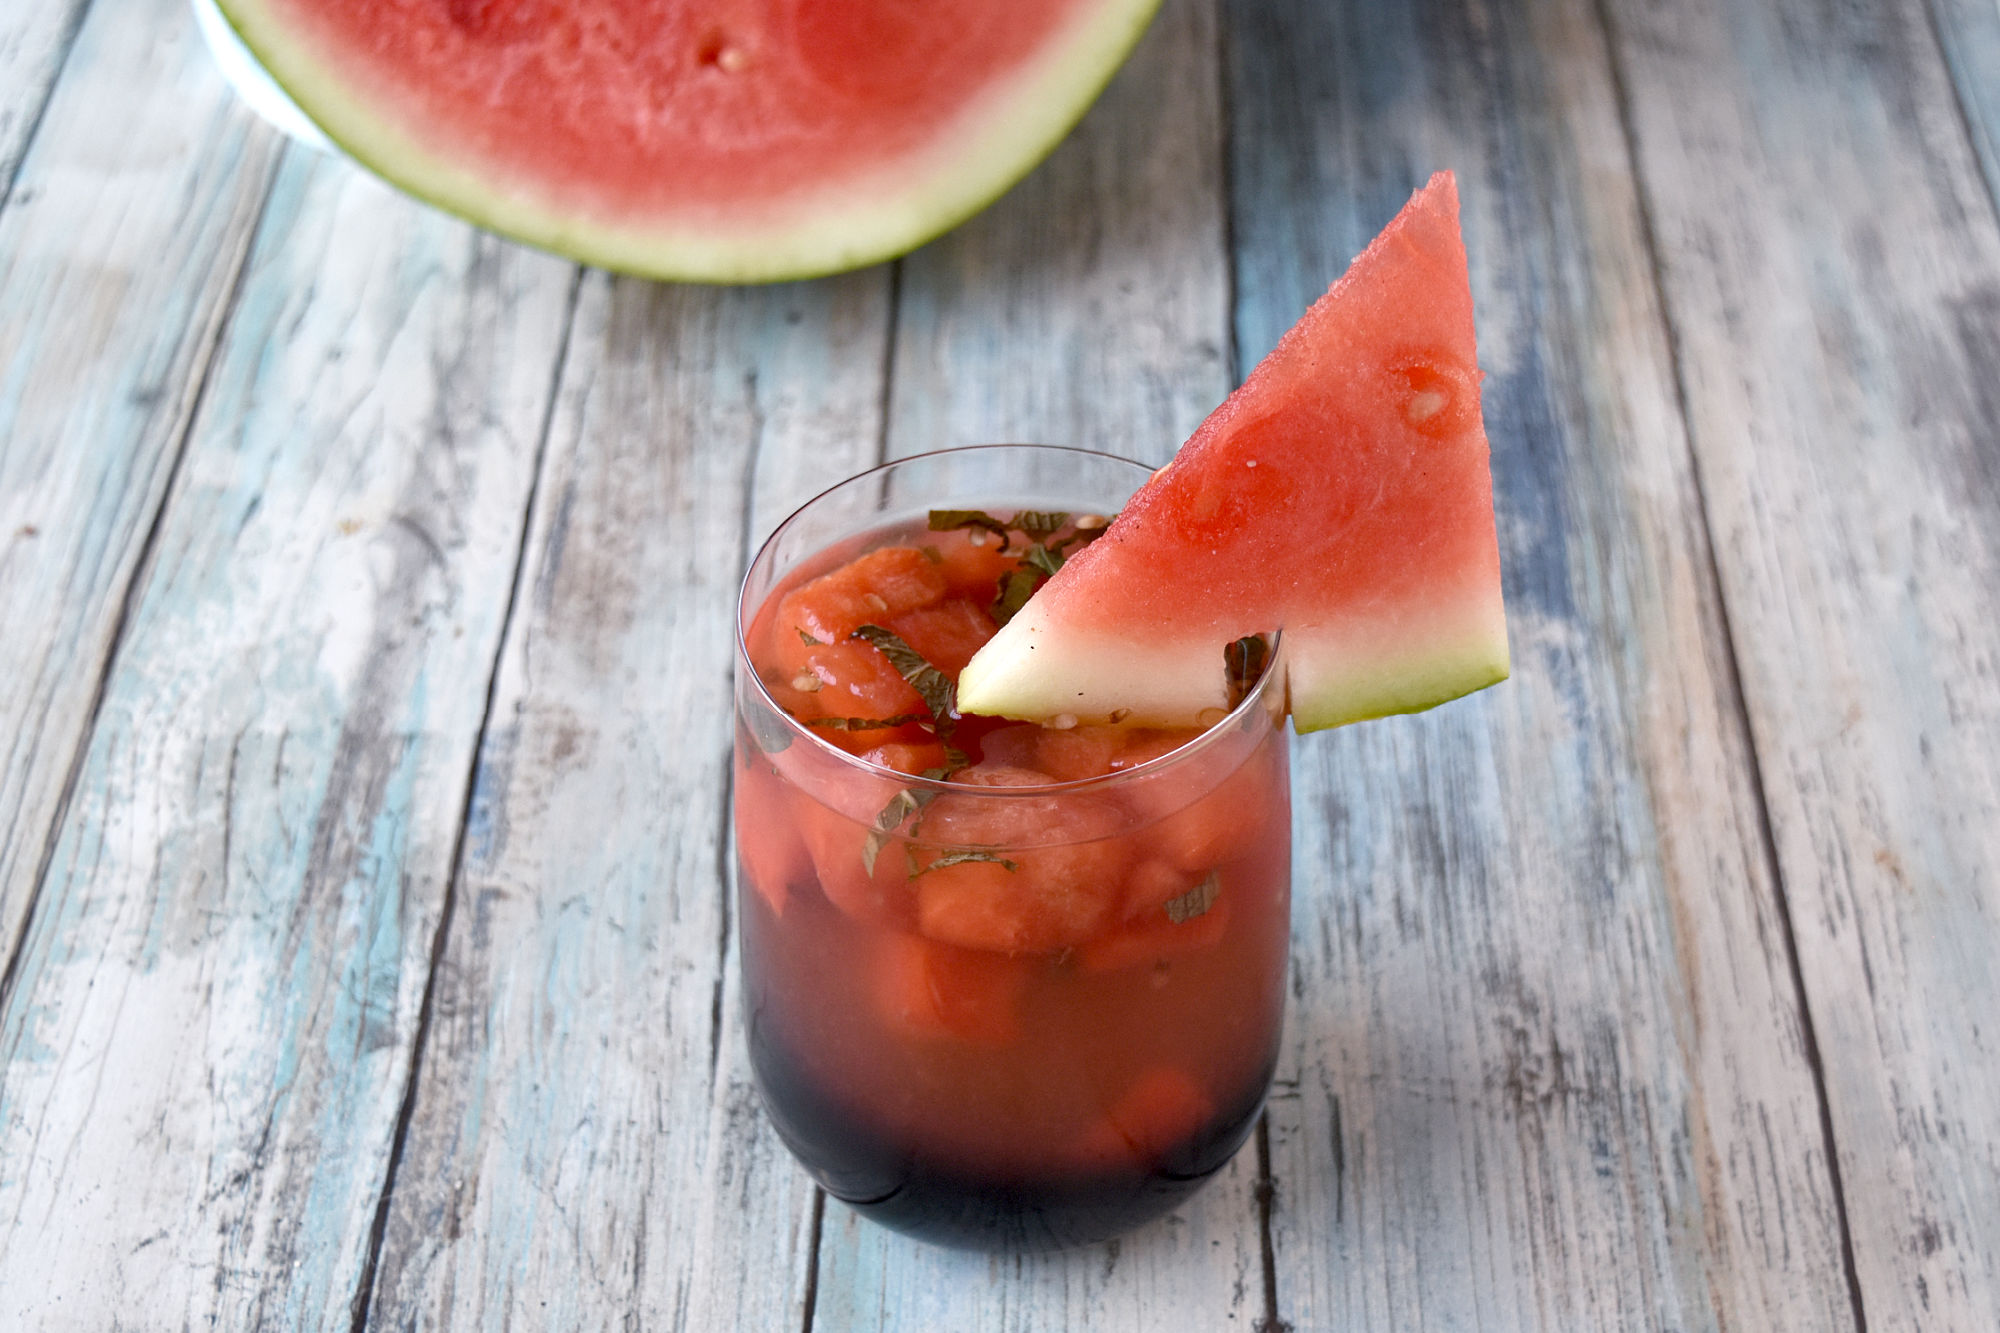 Watermelon Basil Sangria is full of sweet watermelon, vibrant basil, and sweet rosé.  It’s perfectly chilled with plenty of summer flavor to sit poolside, at a backyard party, or sitting on your deck after work. #HerbWeek #sangria #watermelonsangria #freshbasil #rosesangria
